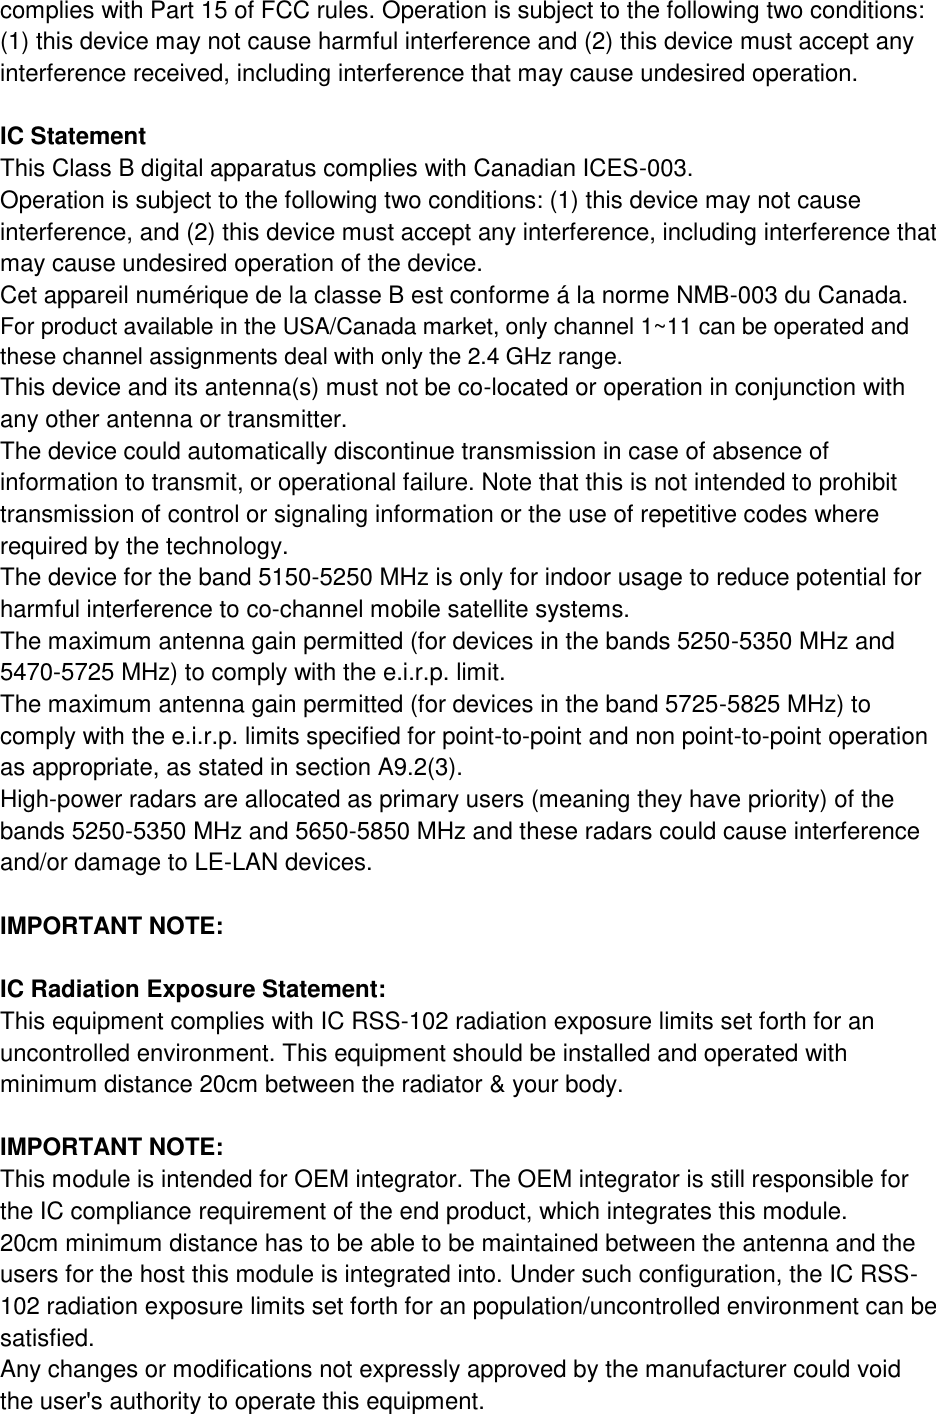 complies with Part 15 of FCC rules. Operation is subject to the following two conditions: (1) this device may not cause harmful interference and (2) this device must accept any interference received, including interference that may cause undesired operation.  IC Statement This Class B digital apparatus complies with Canadian ICES-003. Operation is subject to the following two conditions: (1) this device may not cause interference, and (2) this device must accept any interference, including interference that may cause undesired operation of the device. Cet appareil numérique de la classe B est conforme á la norme NMB-003 du Canada. For product available in the USA/Canada market, only channel 1~11 can be operated and these channel assignments deal with only the 2.4 GHz range. This device and its antenna(s) must not be co-located or operation in conjunction with any other antenna or transmitter. The device could automatically discontinue transmission in case of absence of information to transmit, or operational failure. Note that this is not intended to prohibit transmission of control or signaling information or the use of repetitive codes where required by the technology. The device for the band 5150-5250 MHz is only for indoor usage to reduce potential for harmful interference to co-channel mobile satellite systems. The maximum antenna gain permitted (for devices in the bands 5250-5350 MHz and 5470-5725 MHz) to comply with the e.i.r.p. limit. The maximum antenna gain permitted (for devices in the band 5725-5825 MHz) to comply with the e.i.r.p. limits specified for point-to-point and non point-to-point operation as appropriate, as stated in section A9.2(3). High-power radars are allocated as primary users (meaning they have priority) of the bands 5250-5350 MHz and 5650-5850 MHz and these radars could cause interference and/or damage to LE-LAN devices.  IMPORTANT NOTE:  IC Radiation Exposure Statement: This equipment complies with IC RSS-102 radiation exposure limits set forth for an uncontrolled environment. This equipment should be installed and operated with minimum distance 20cm between the radiator &amp; your body.  IMPORTANT NOTE: This module is intended for OEM integrator. The OEM integrator is still responsible for the IC compliance requirement of the end product, which integrates this module. 20cm minimum distance has to be able to be maintained between the antenna and the users for the host this module is integrated into. Under such configuration, the IC RSS- 102 radiation exposure limits set forth for an population/uncontrolled environment can be satisfied. Any changes or modifications not expressly approved by the manufacturer could void the user&apos;s authority to operate this equipment. 